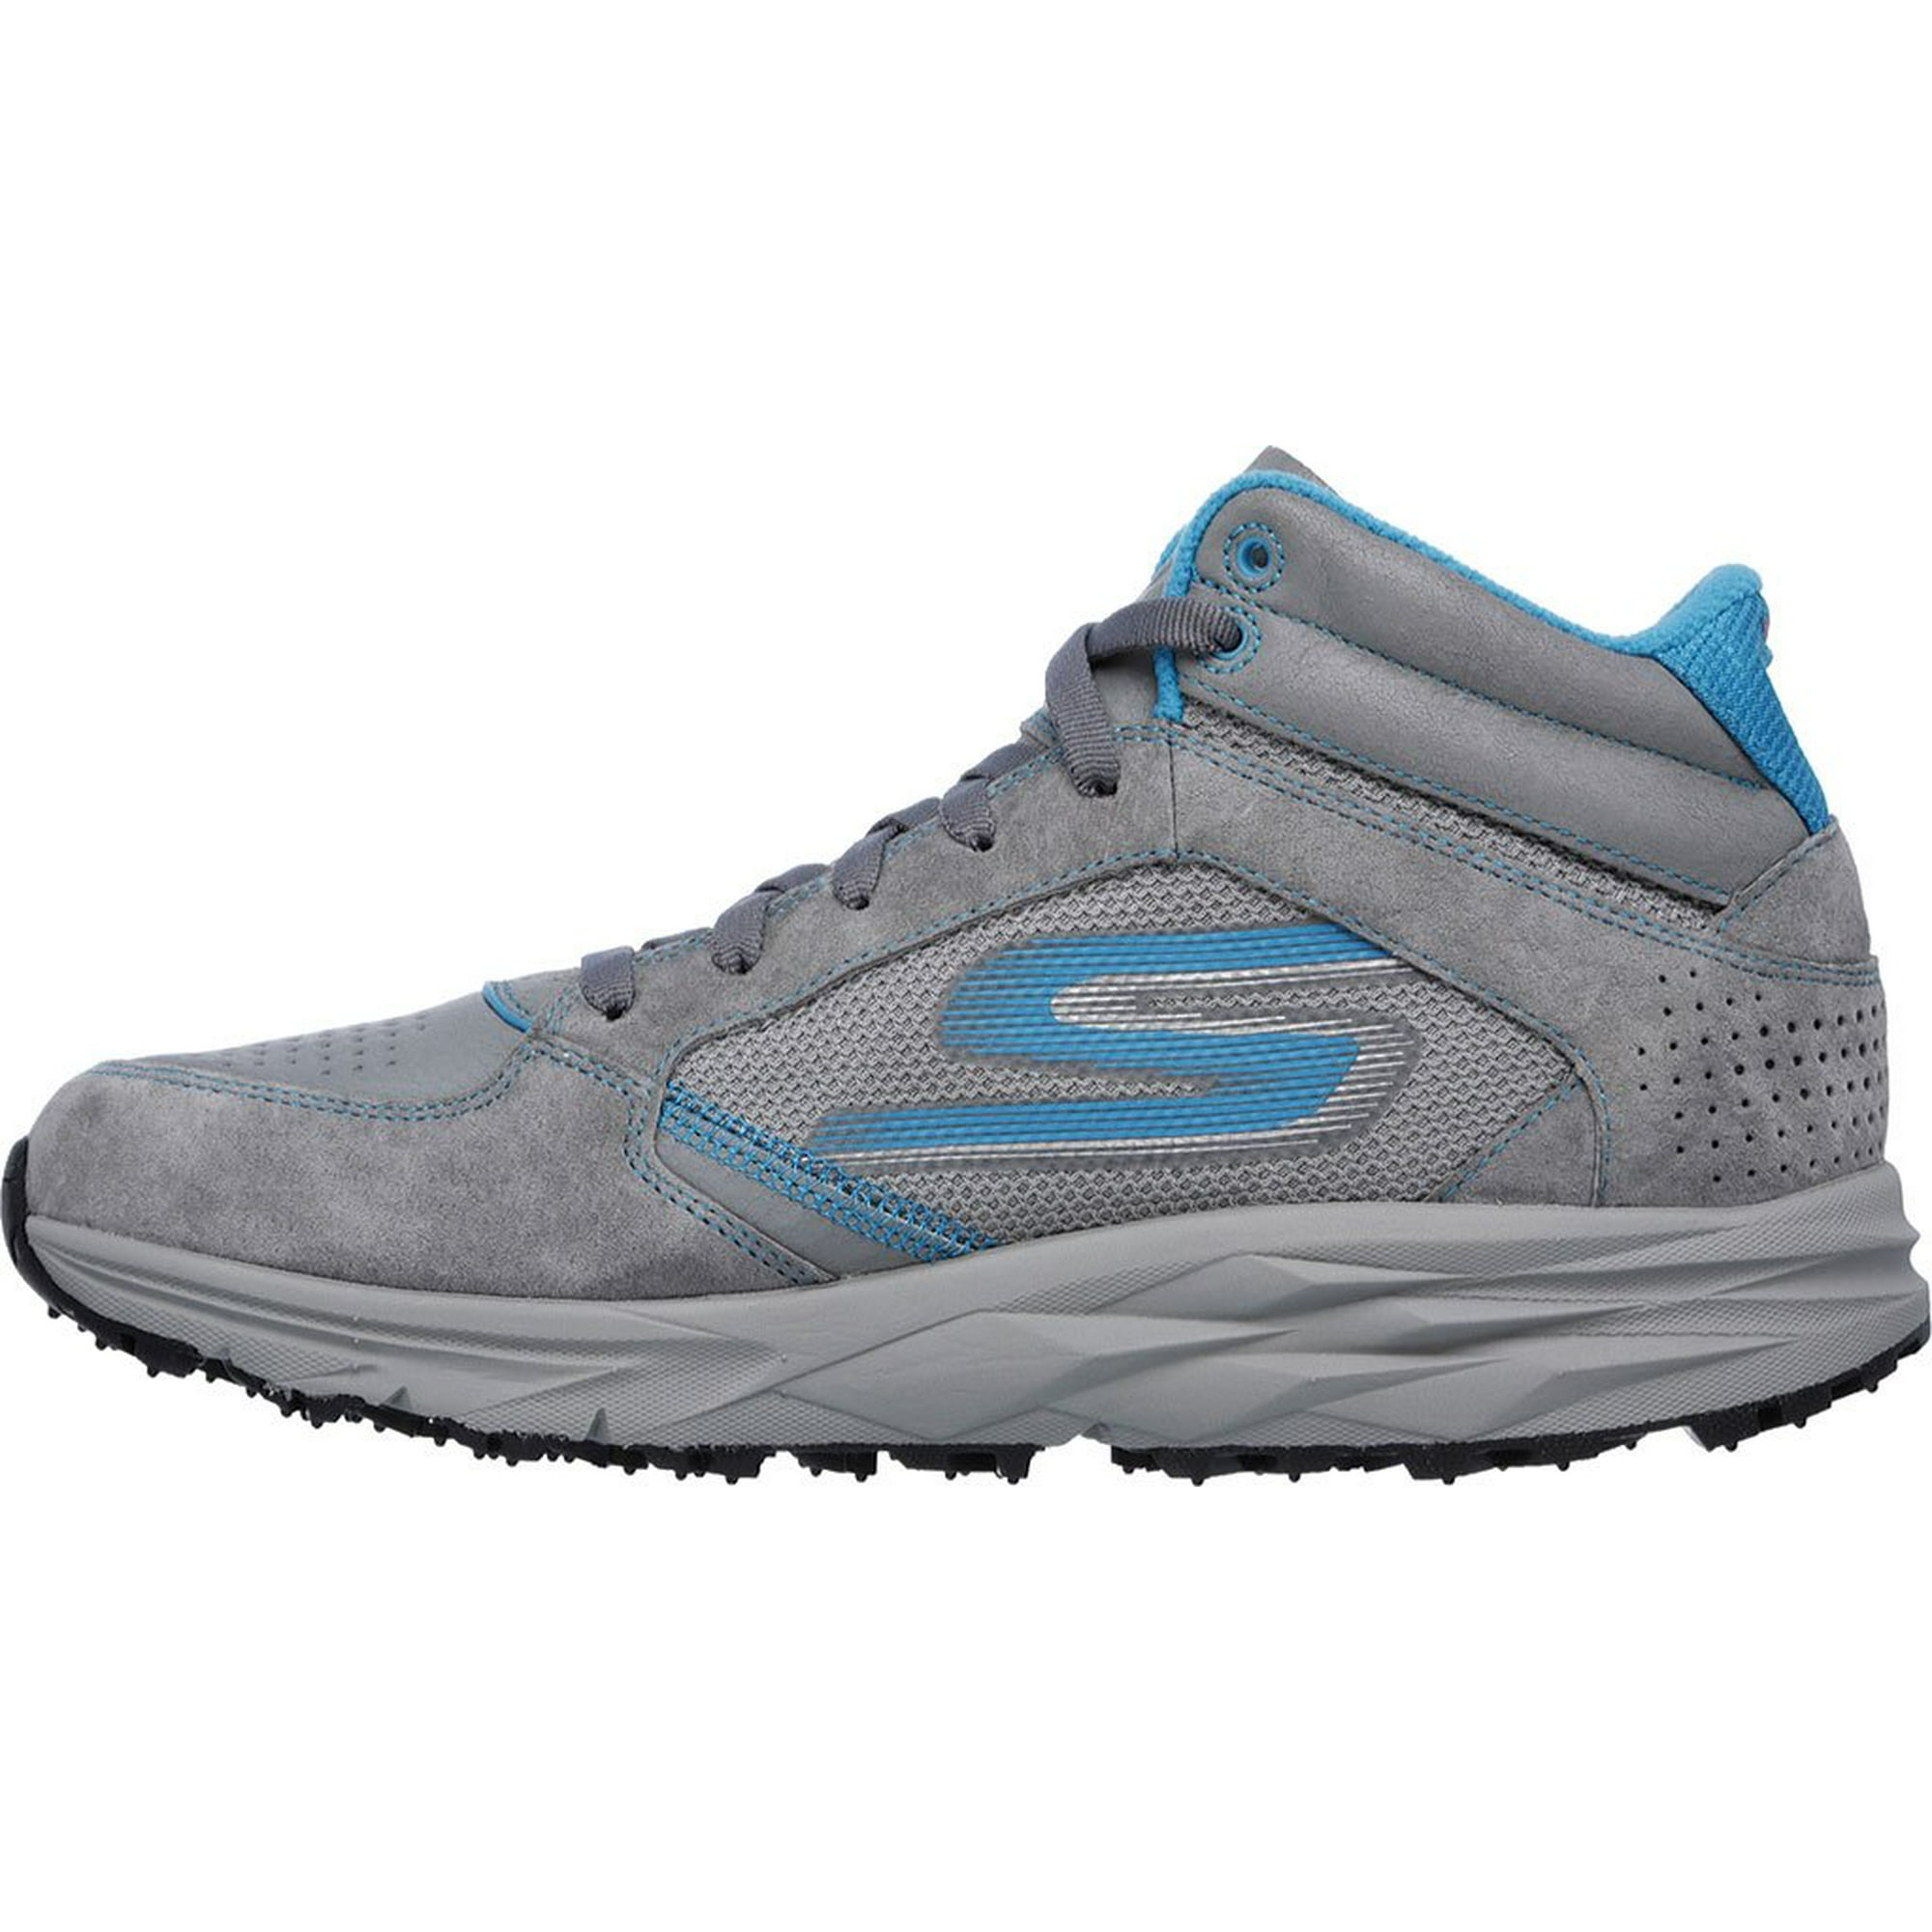 Trail Escape Women Round Toe Suede Hiking Shoe (6.5, Charcoal/Turquoise) |